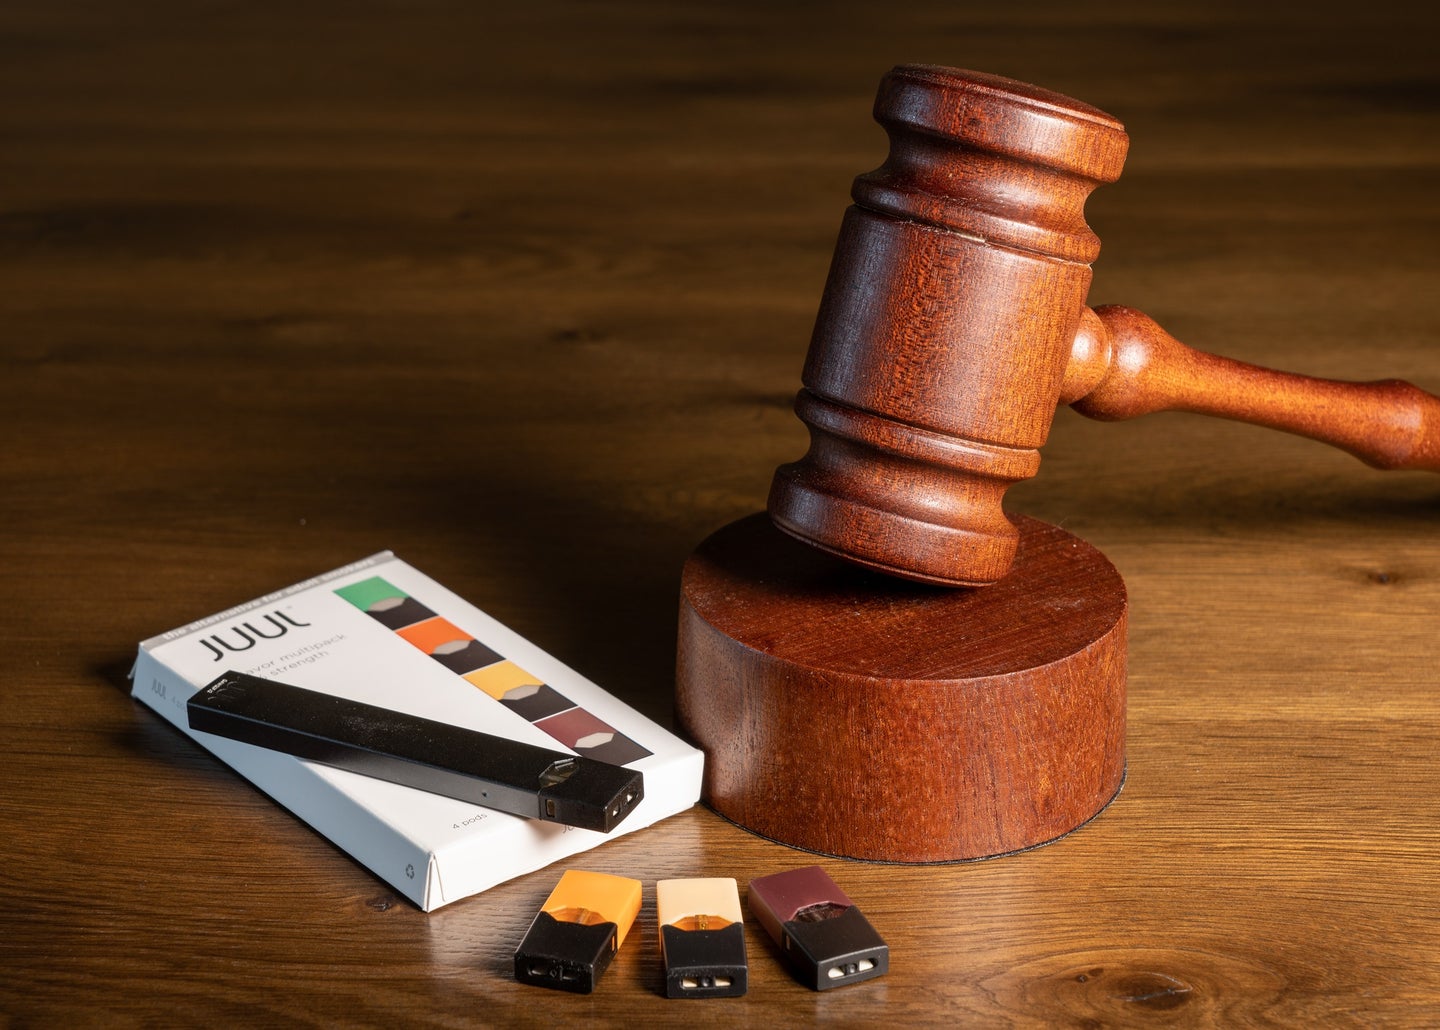 Juul e-cigarette vaping pen next to box and a gavel to symbolize FDA ban decision